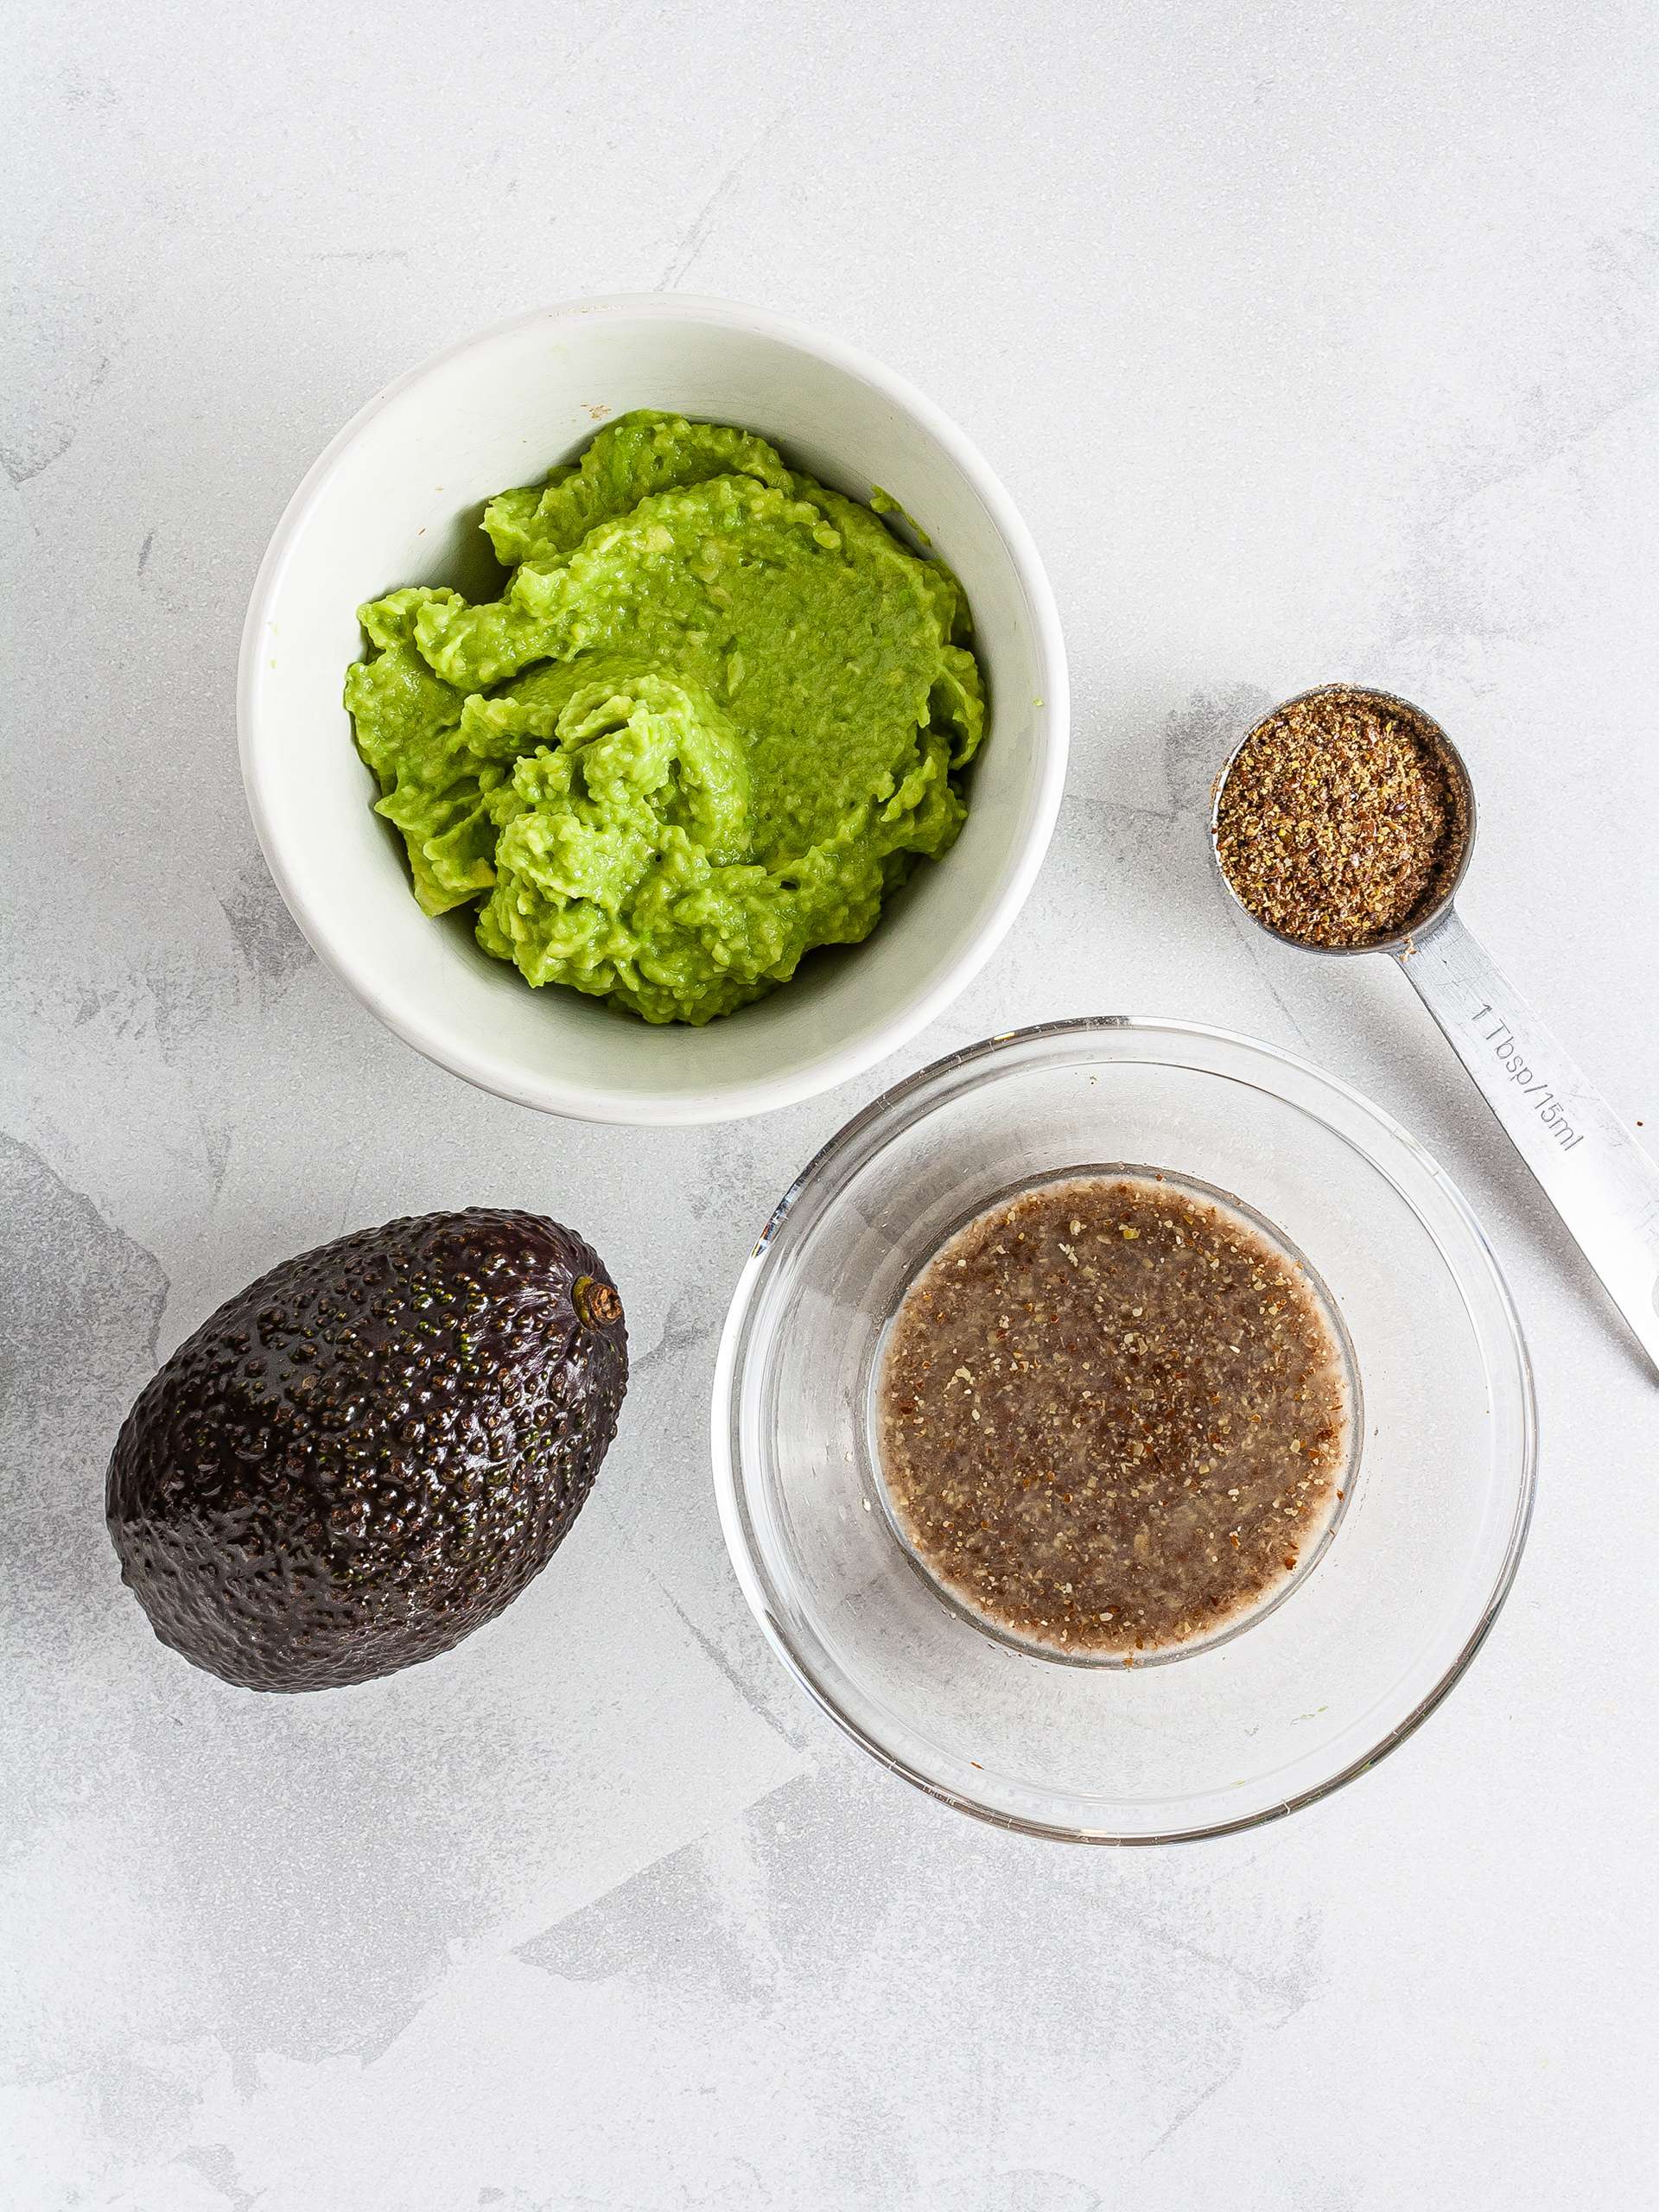 Mashed avocado and flax seeds